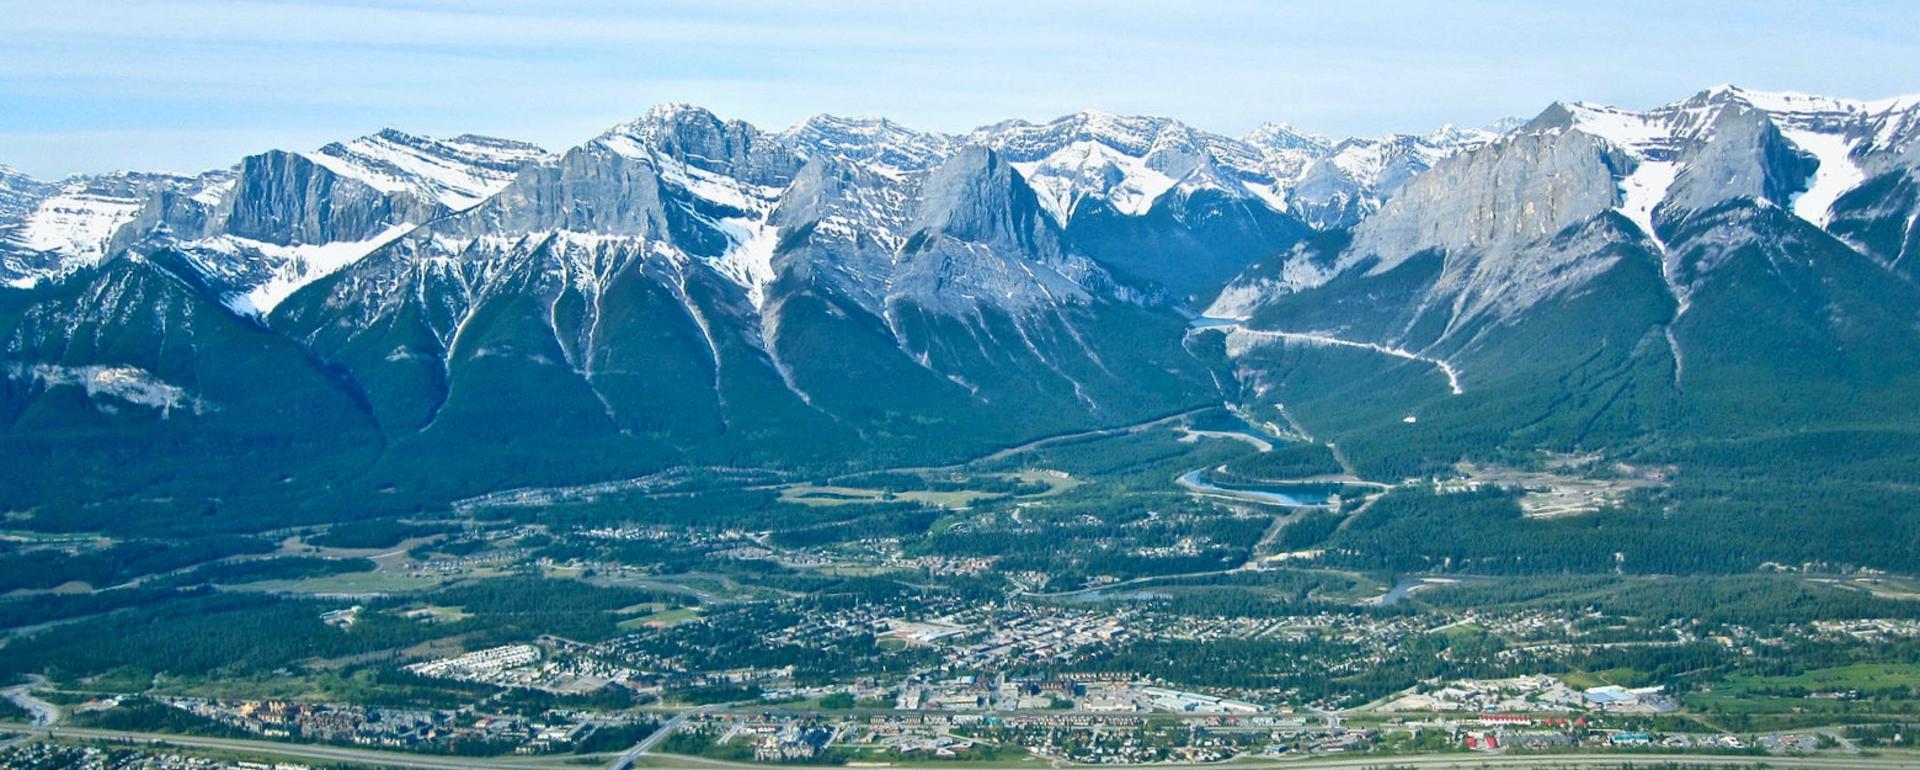 Canmore could easily be Bozeman, Big Sky or Jackson, Wyo